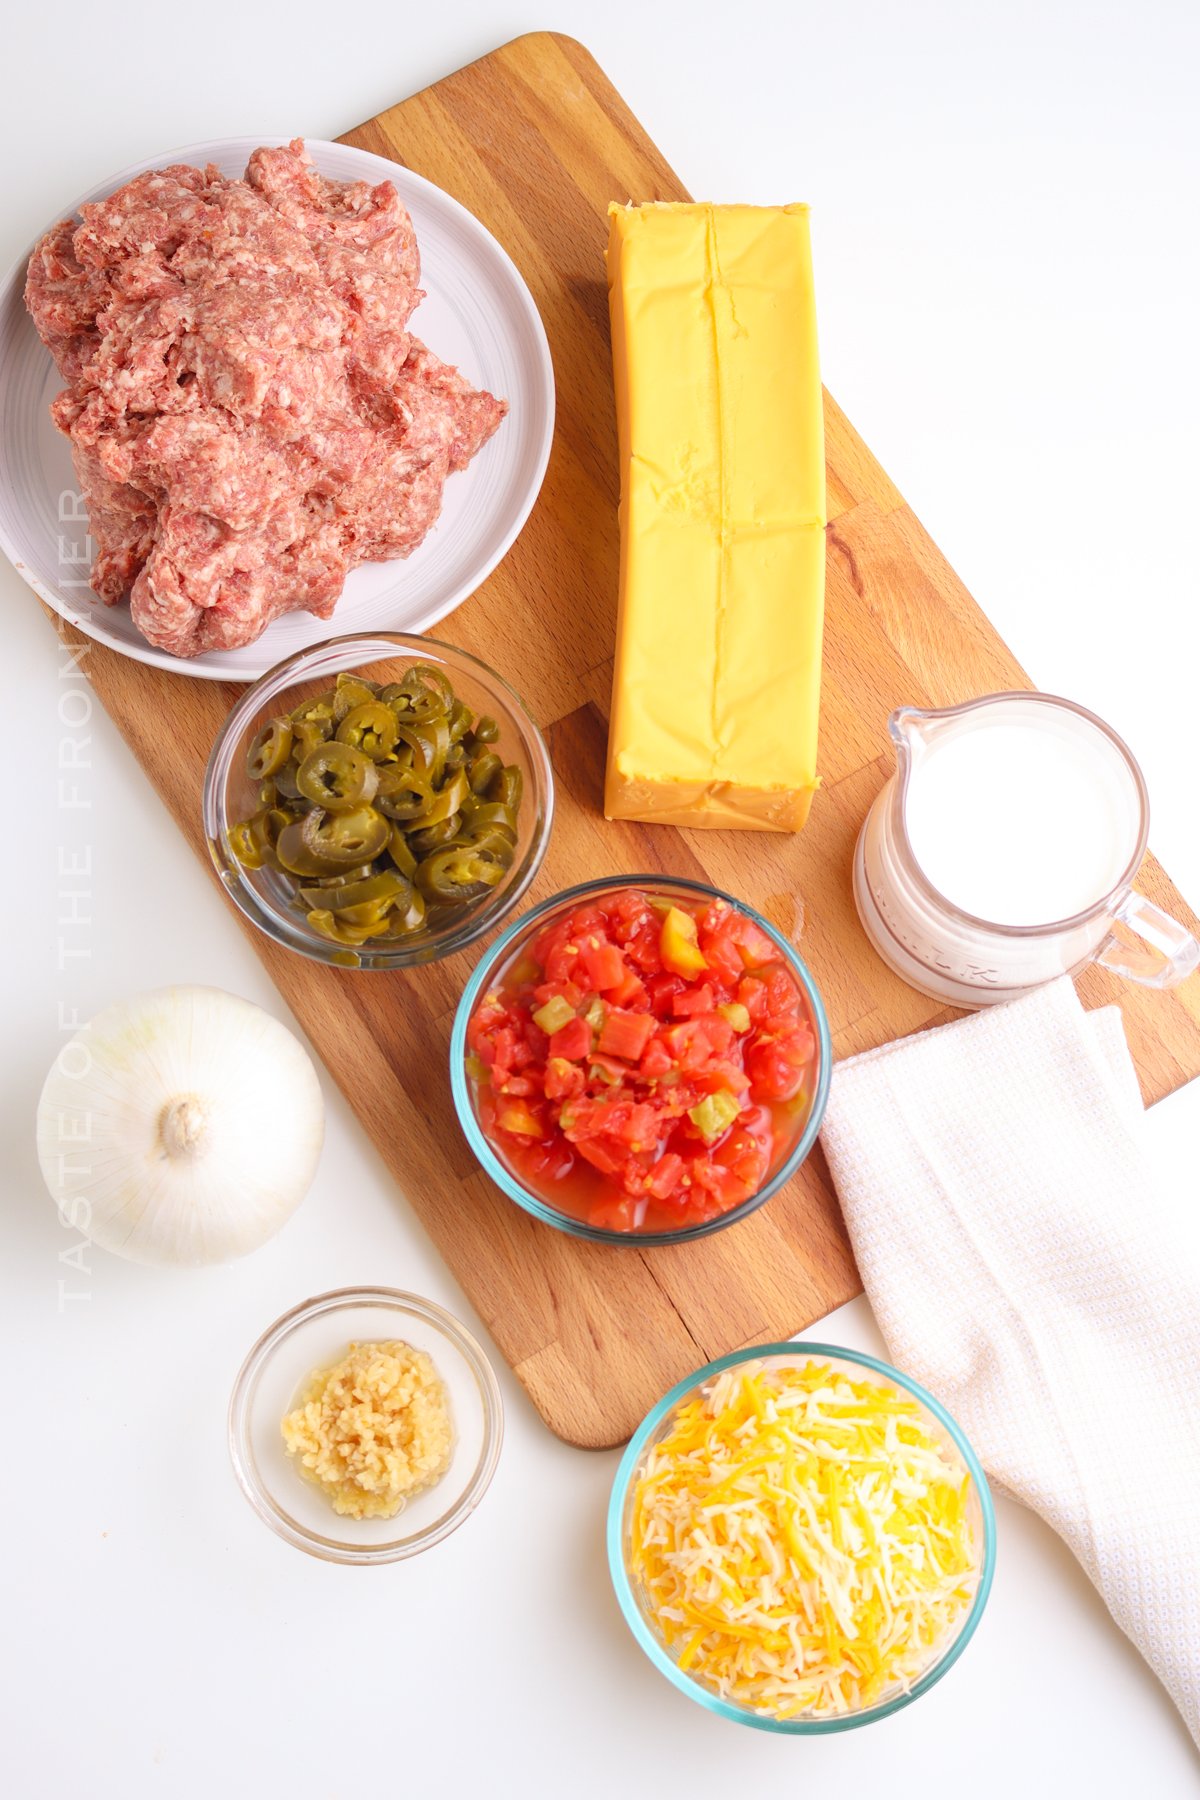 Ingredients for Smoked Queso Dip